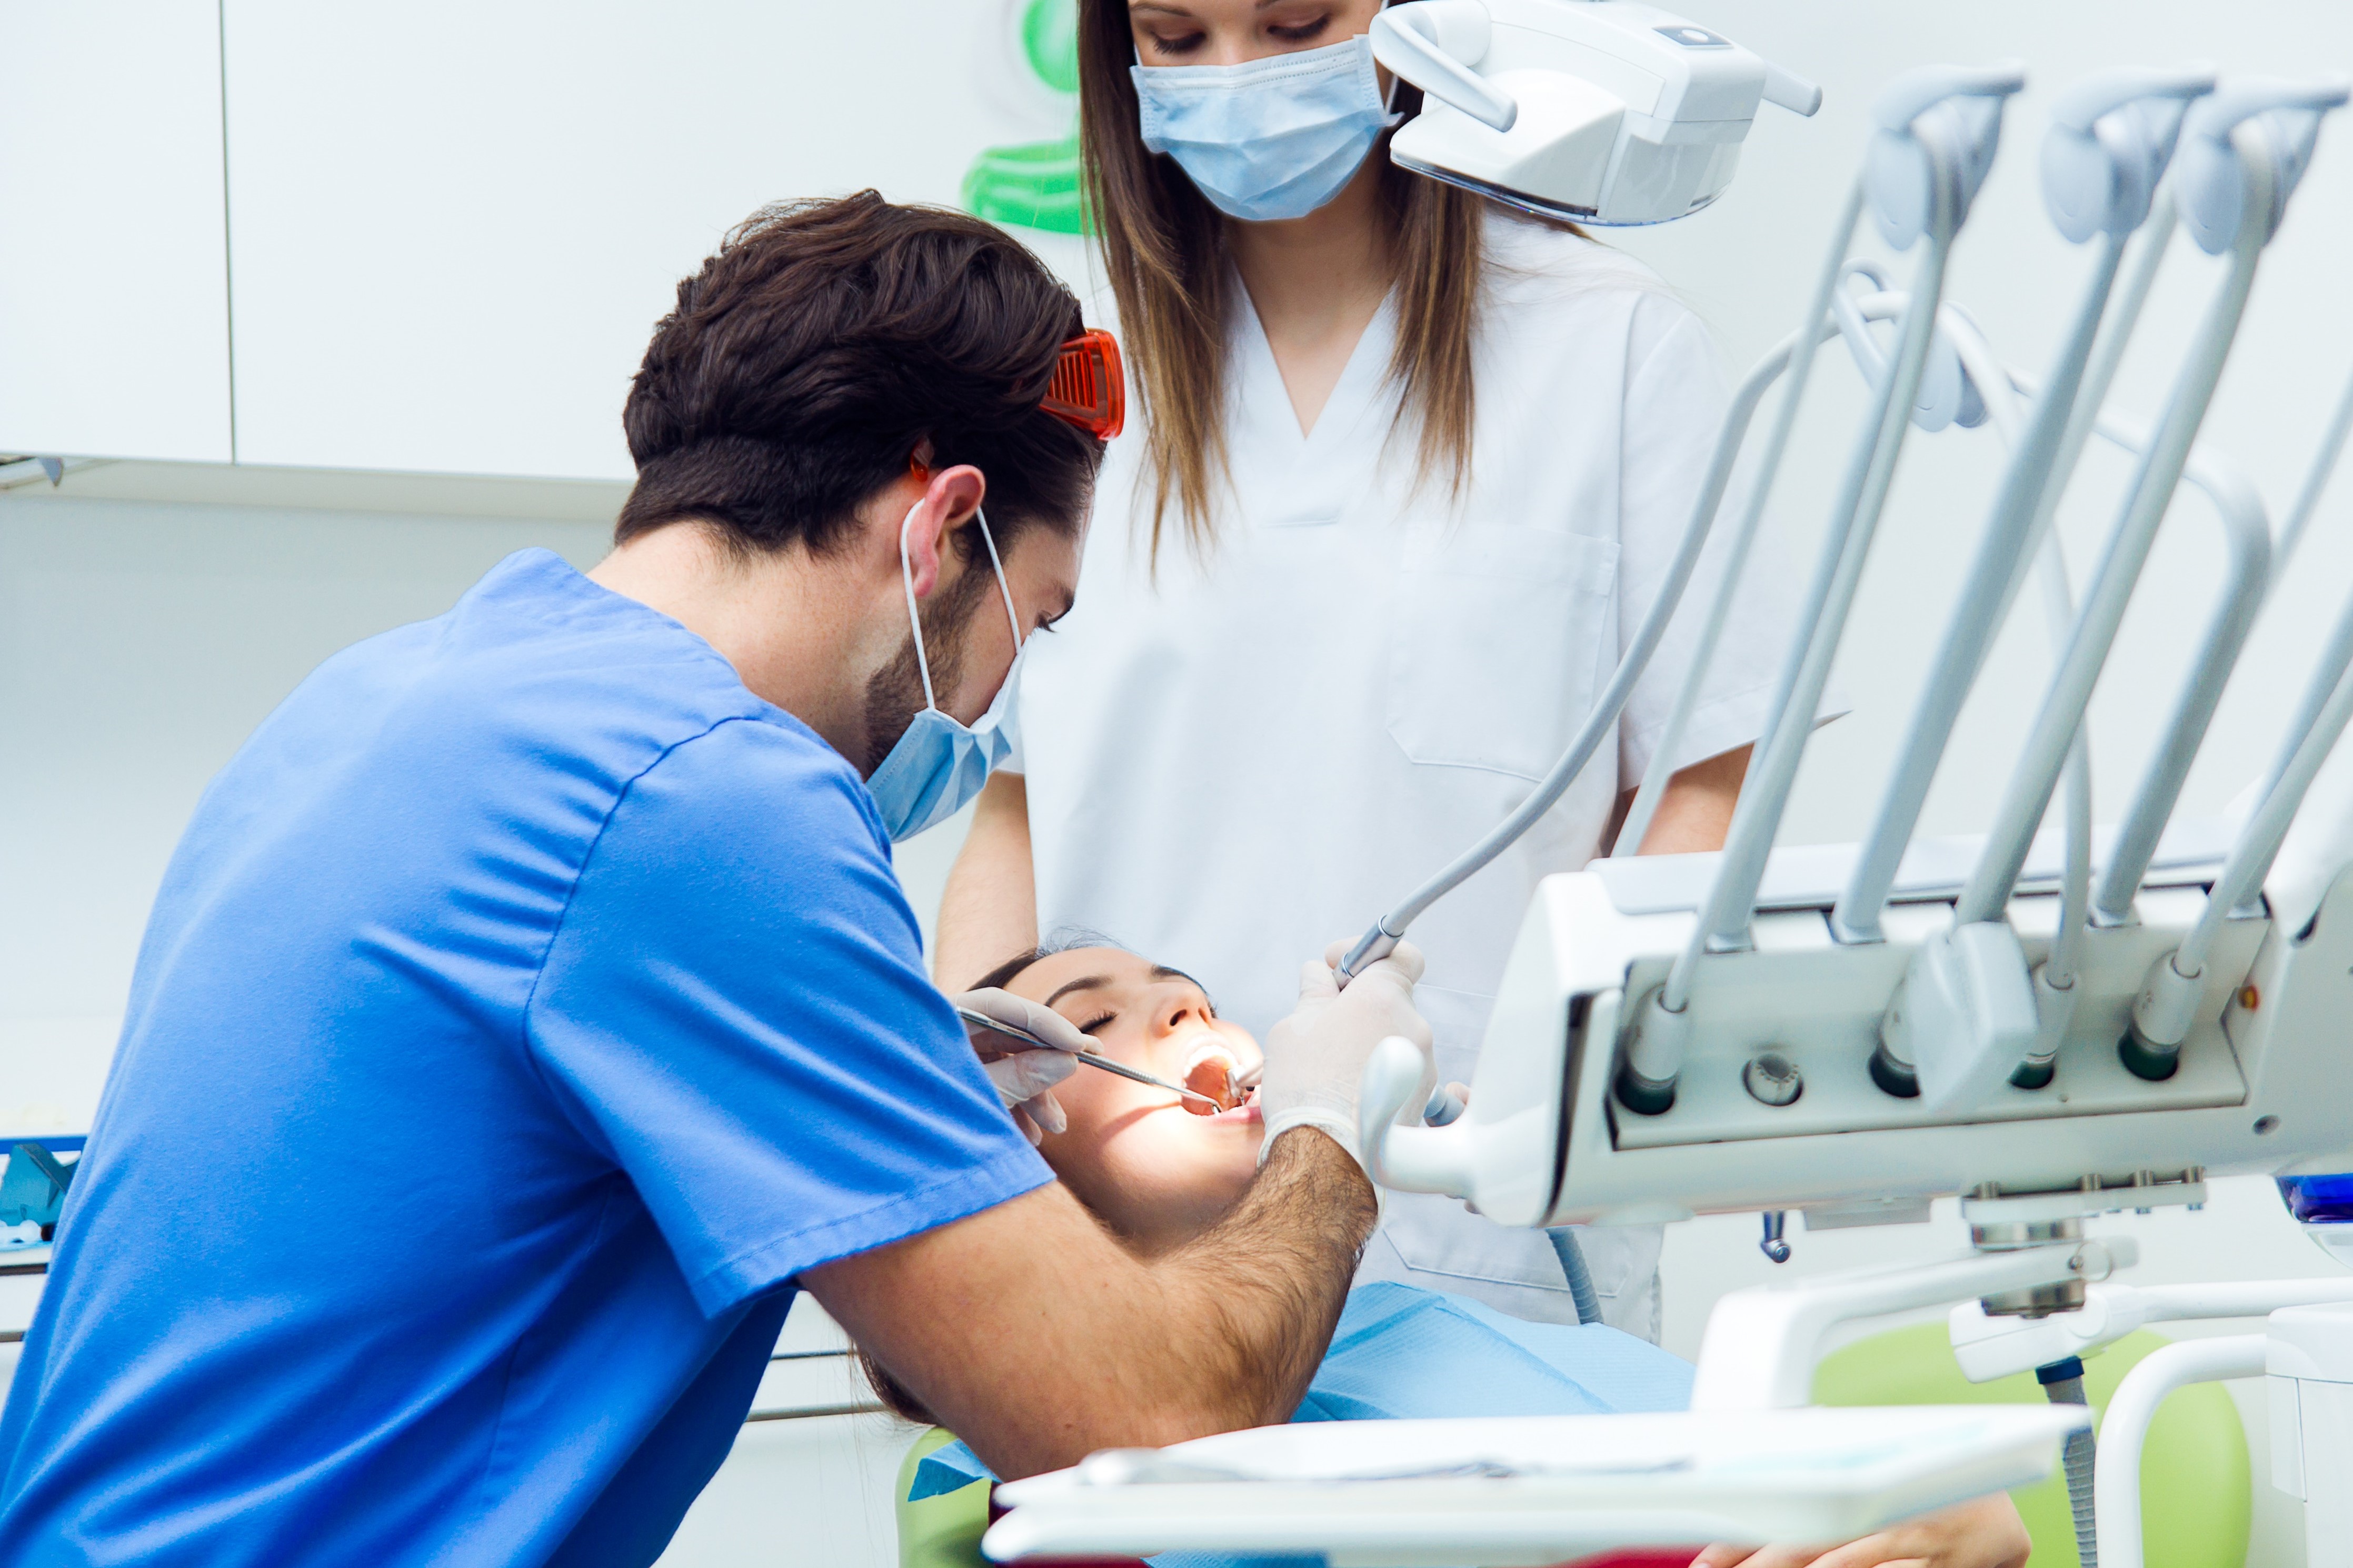 Dental surgeon and dental assistant are exposed to many pollutants in the air during care involving dynamic tools such as milling machine or descaler